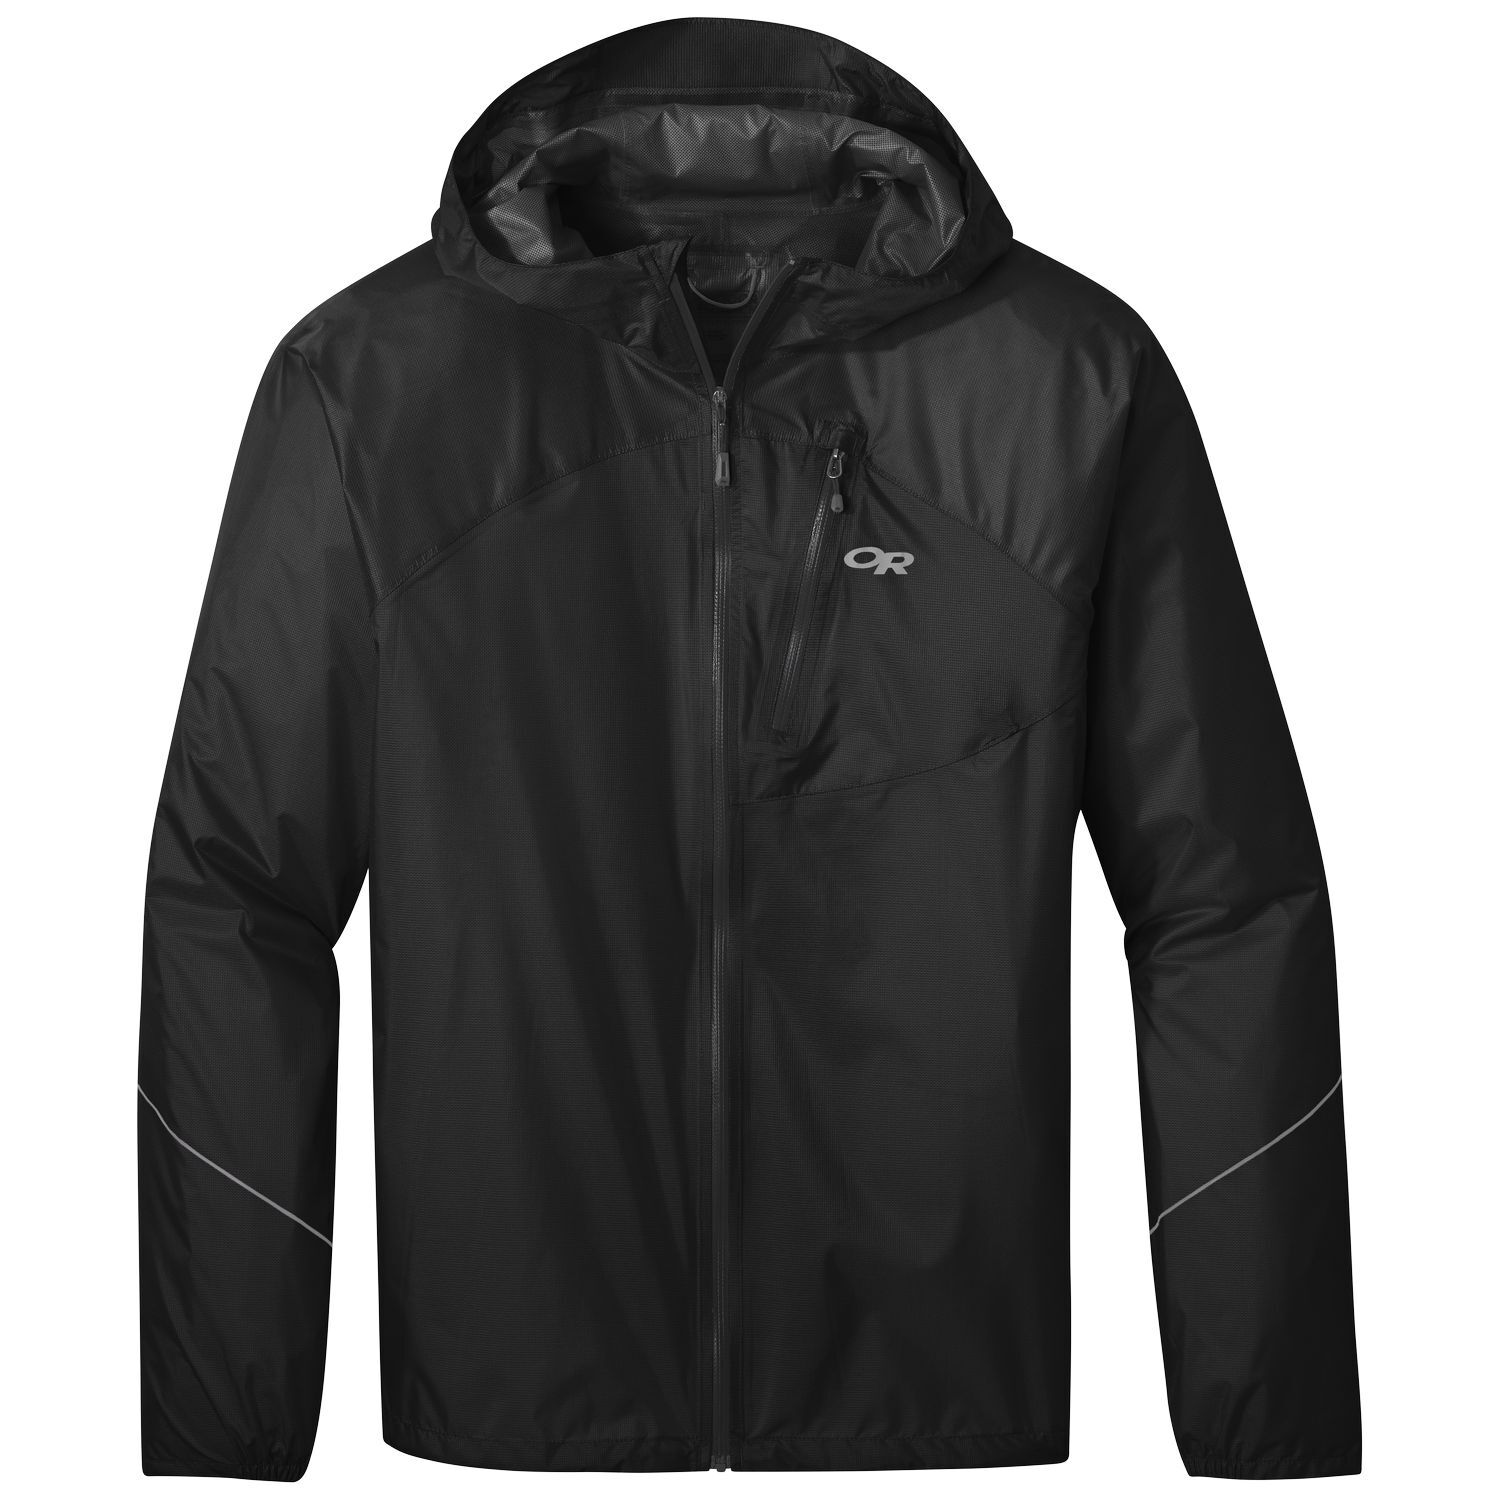 Outdoor Research Helium Rain Jacket - Chaqueta impermeable - Hombre